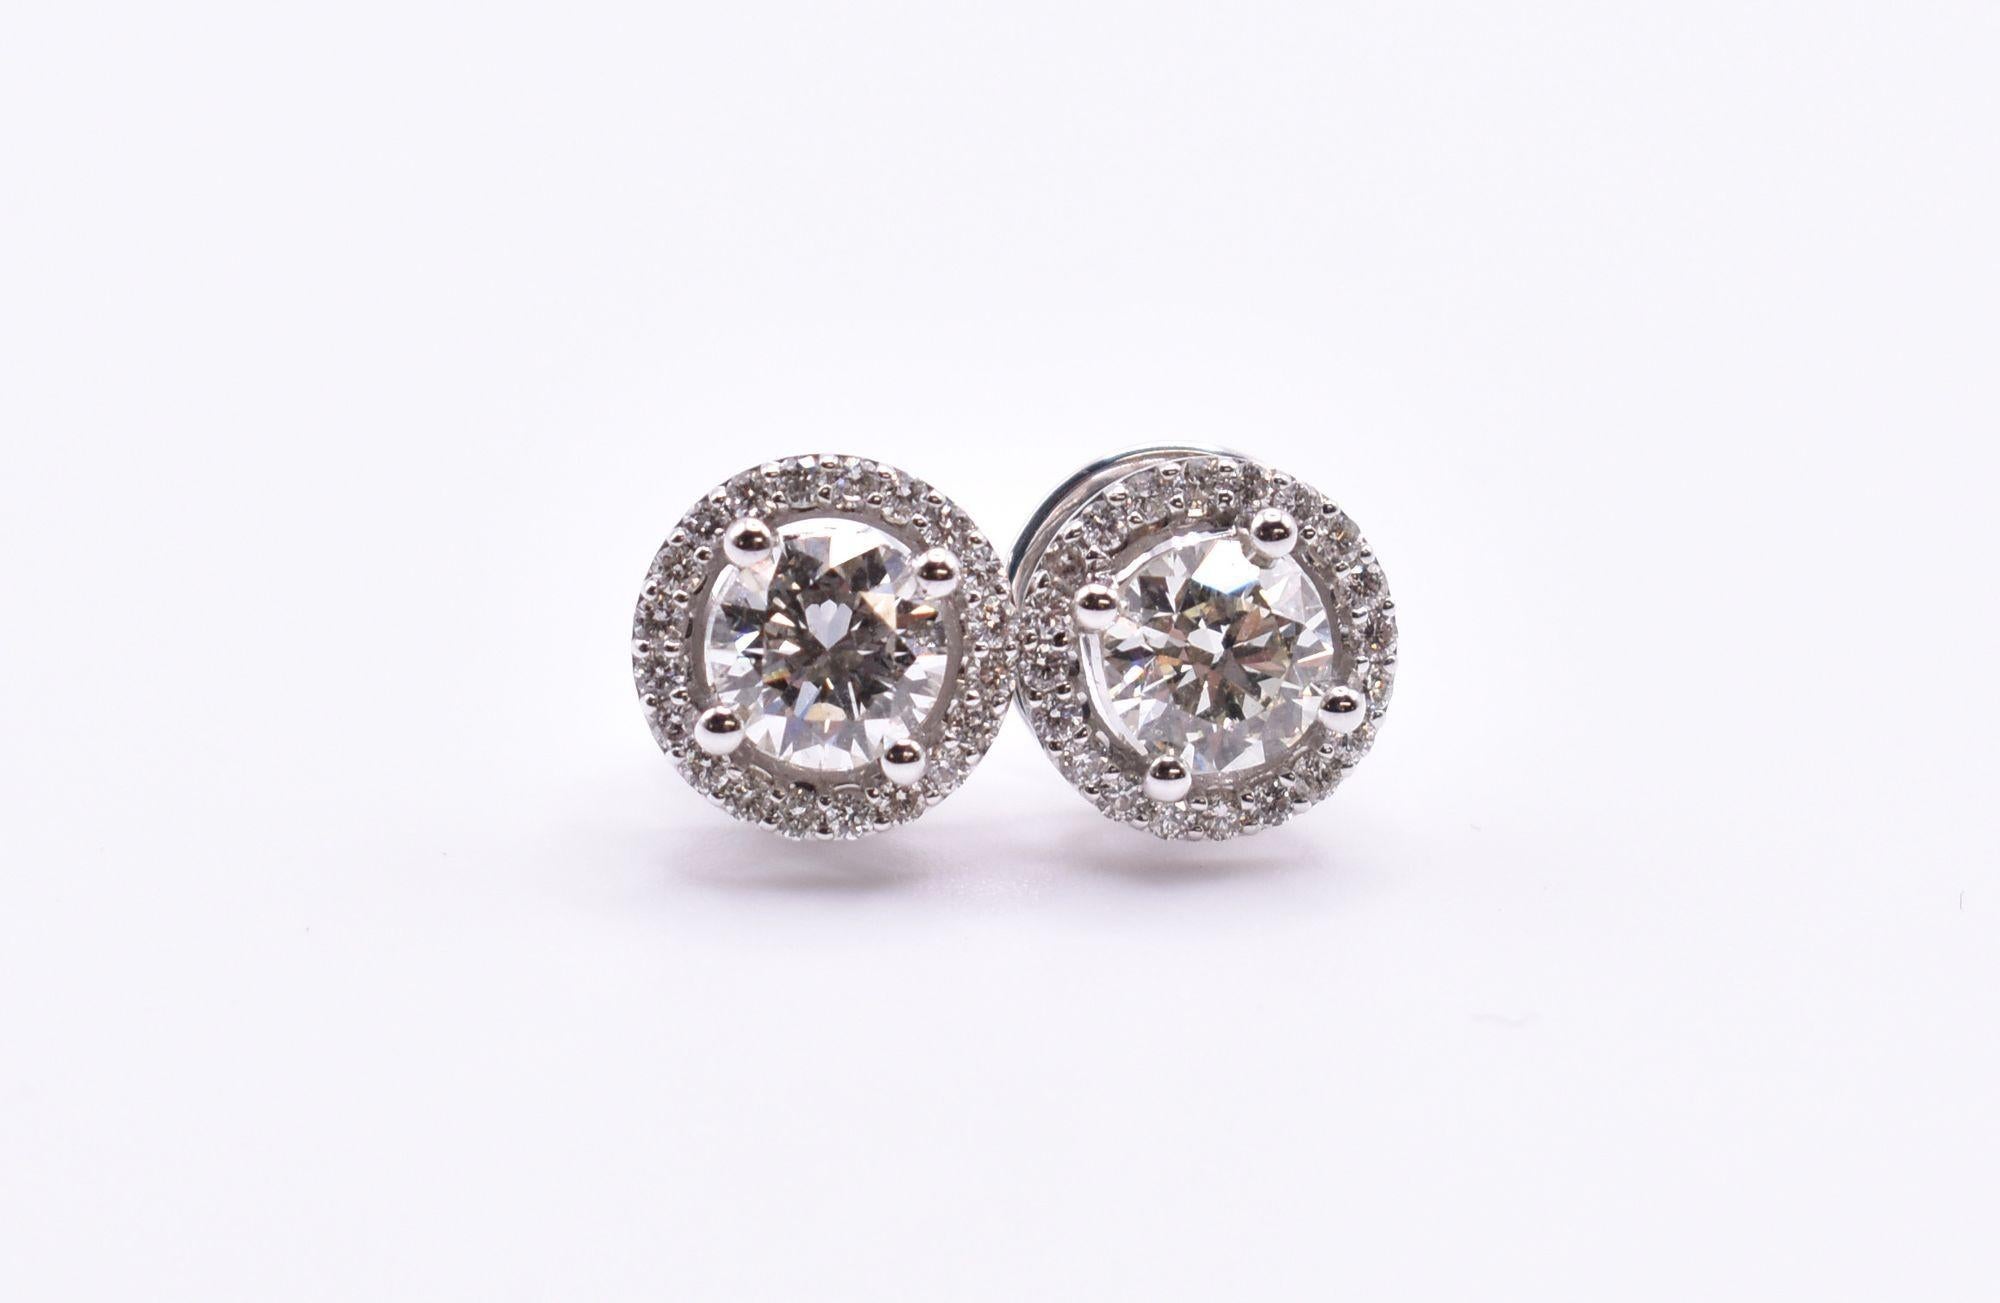 A splendid pair of 18 karat white gold diamond halo stud earrings featuring two bezel set round brilliant cut diamonds of SI1 clarity clarity and I/J colour totaling 1.18 carats, surrounded by 18 prong set diamonds totaling an additional 0.25